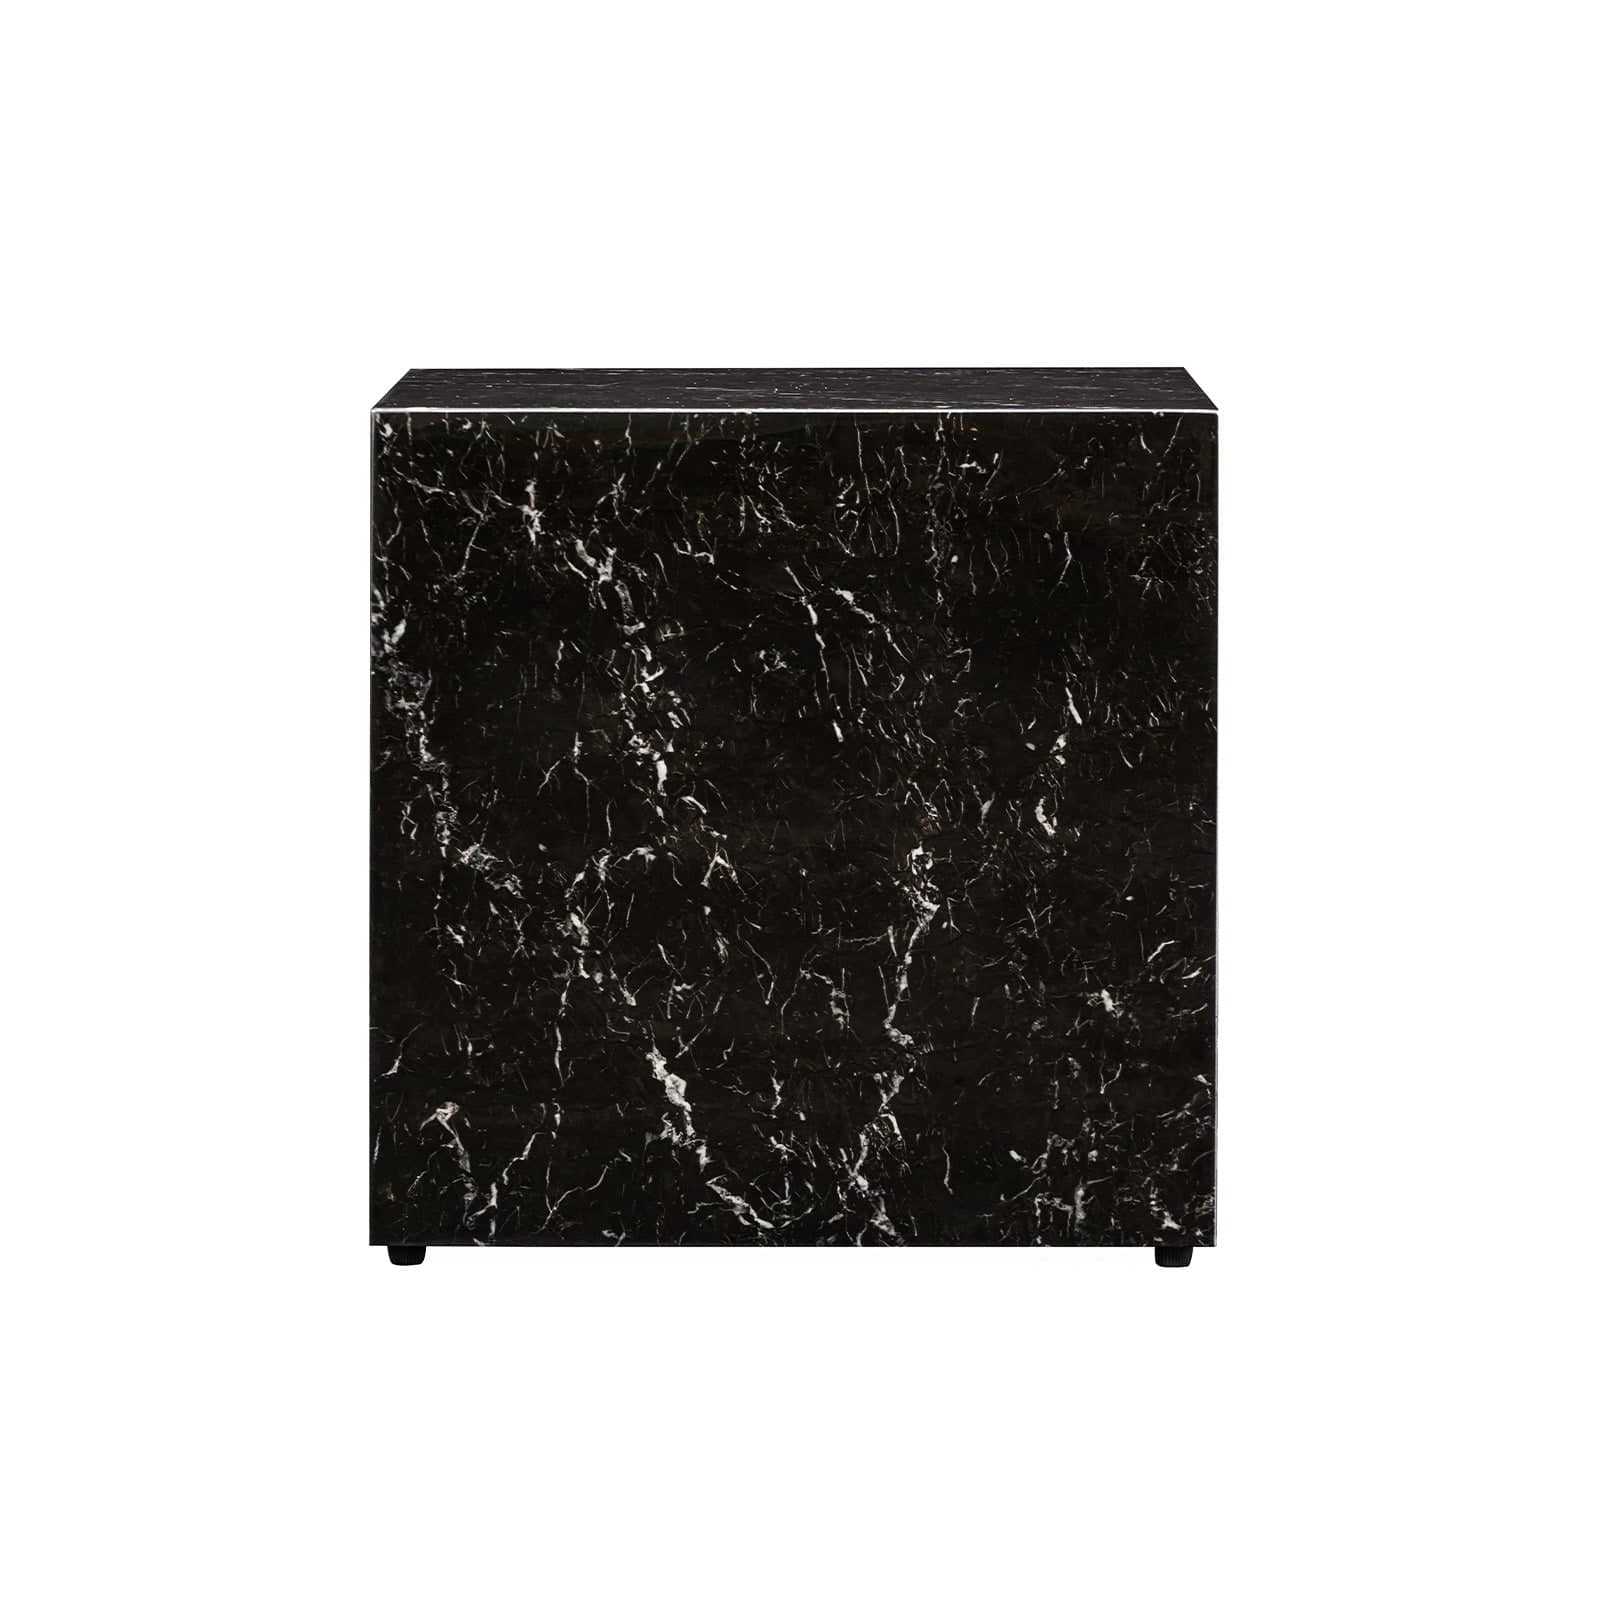 Buy Stage Marble Side Table Low - Black by RJ Living online - RJ Living